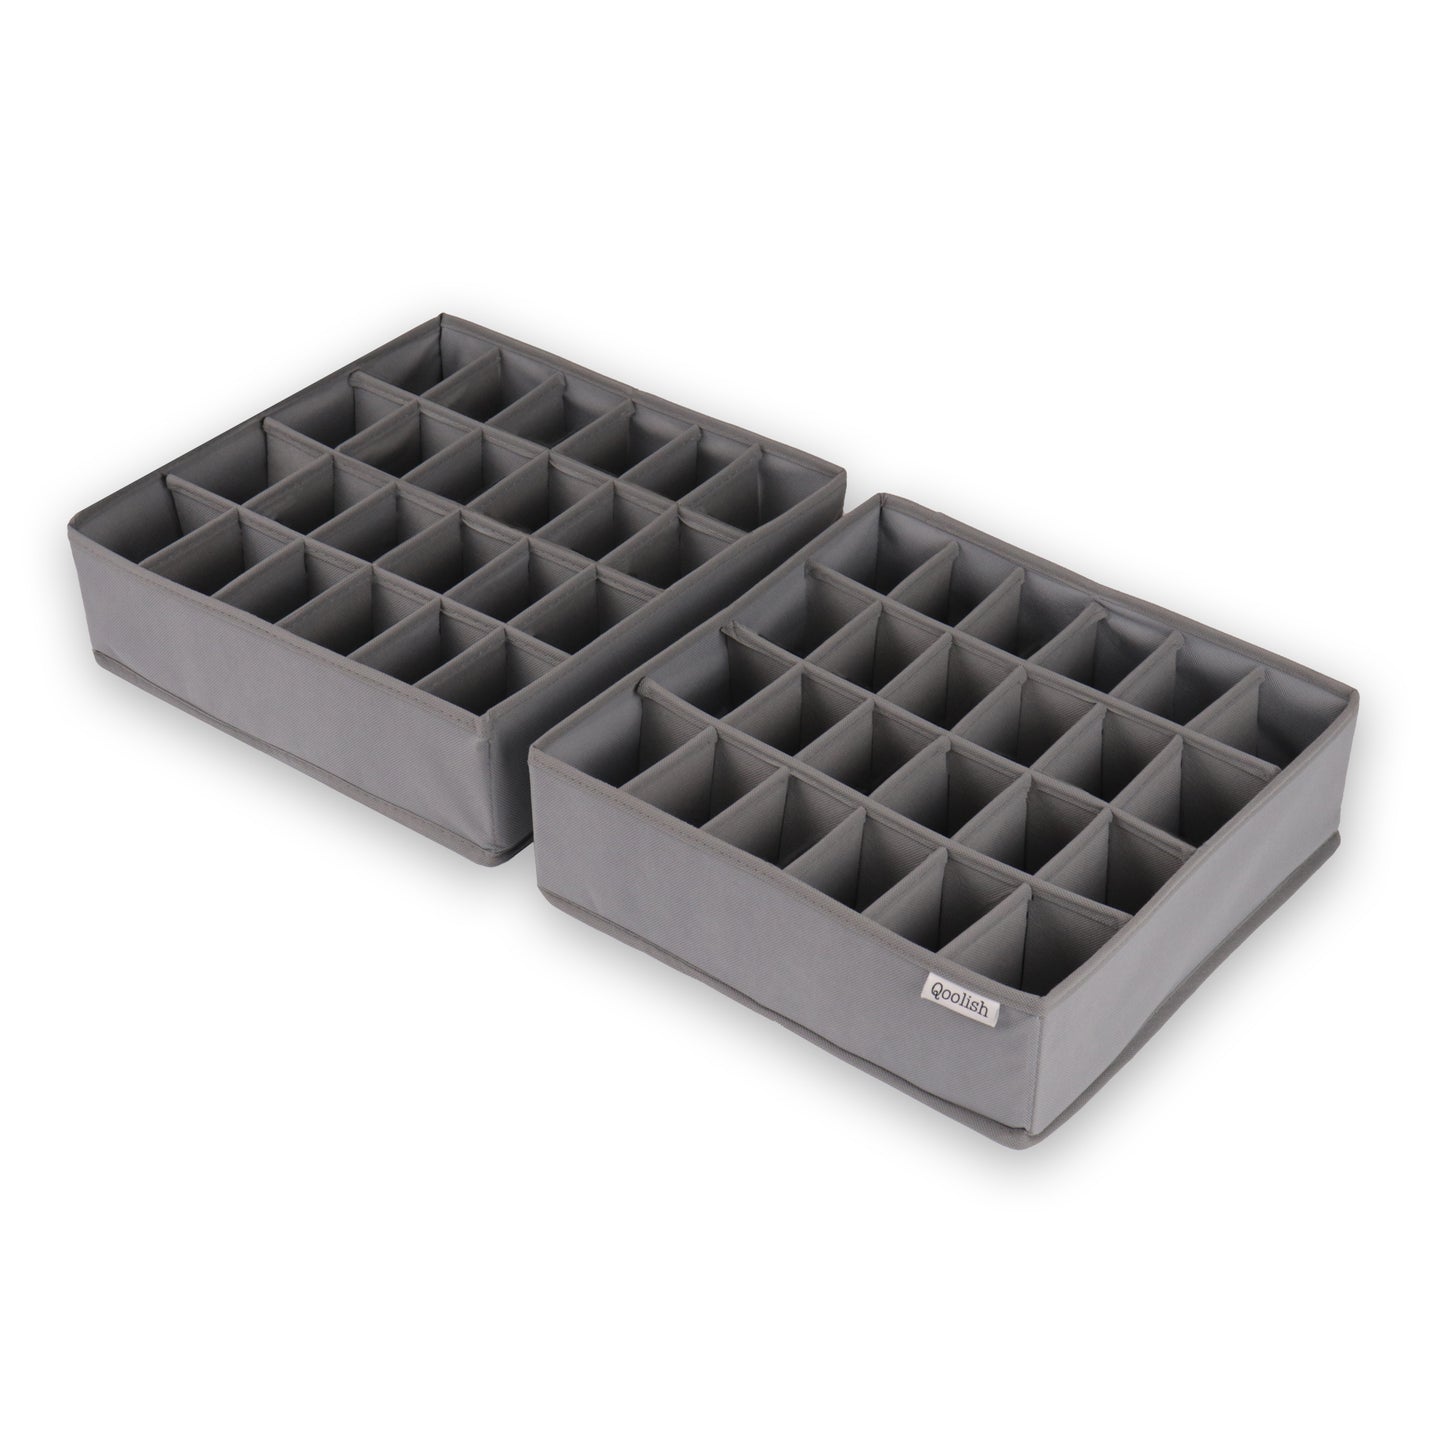 Qoolish 2-Pack Drawer Organizers: Sort and Store in Style! (Available in 6 Colors) - Qoolish